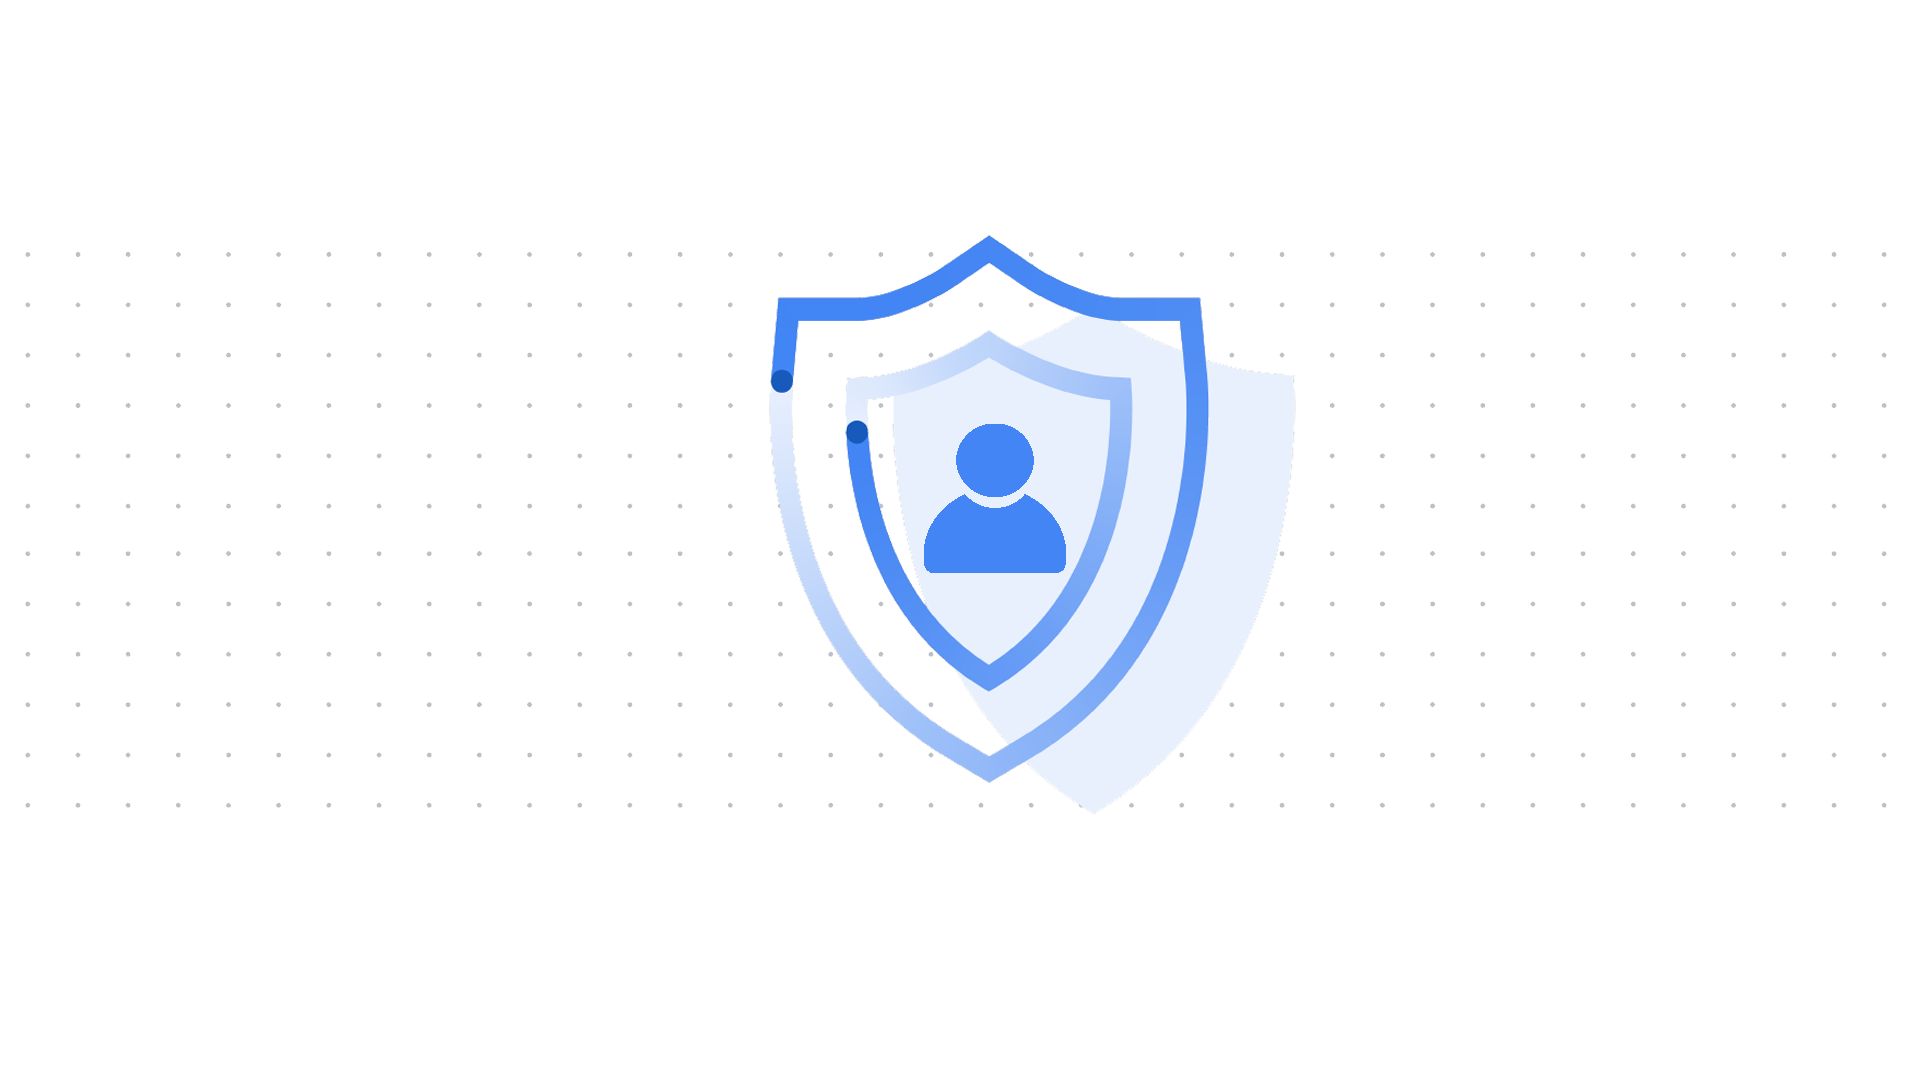 Account protections - A Google Perspective